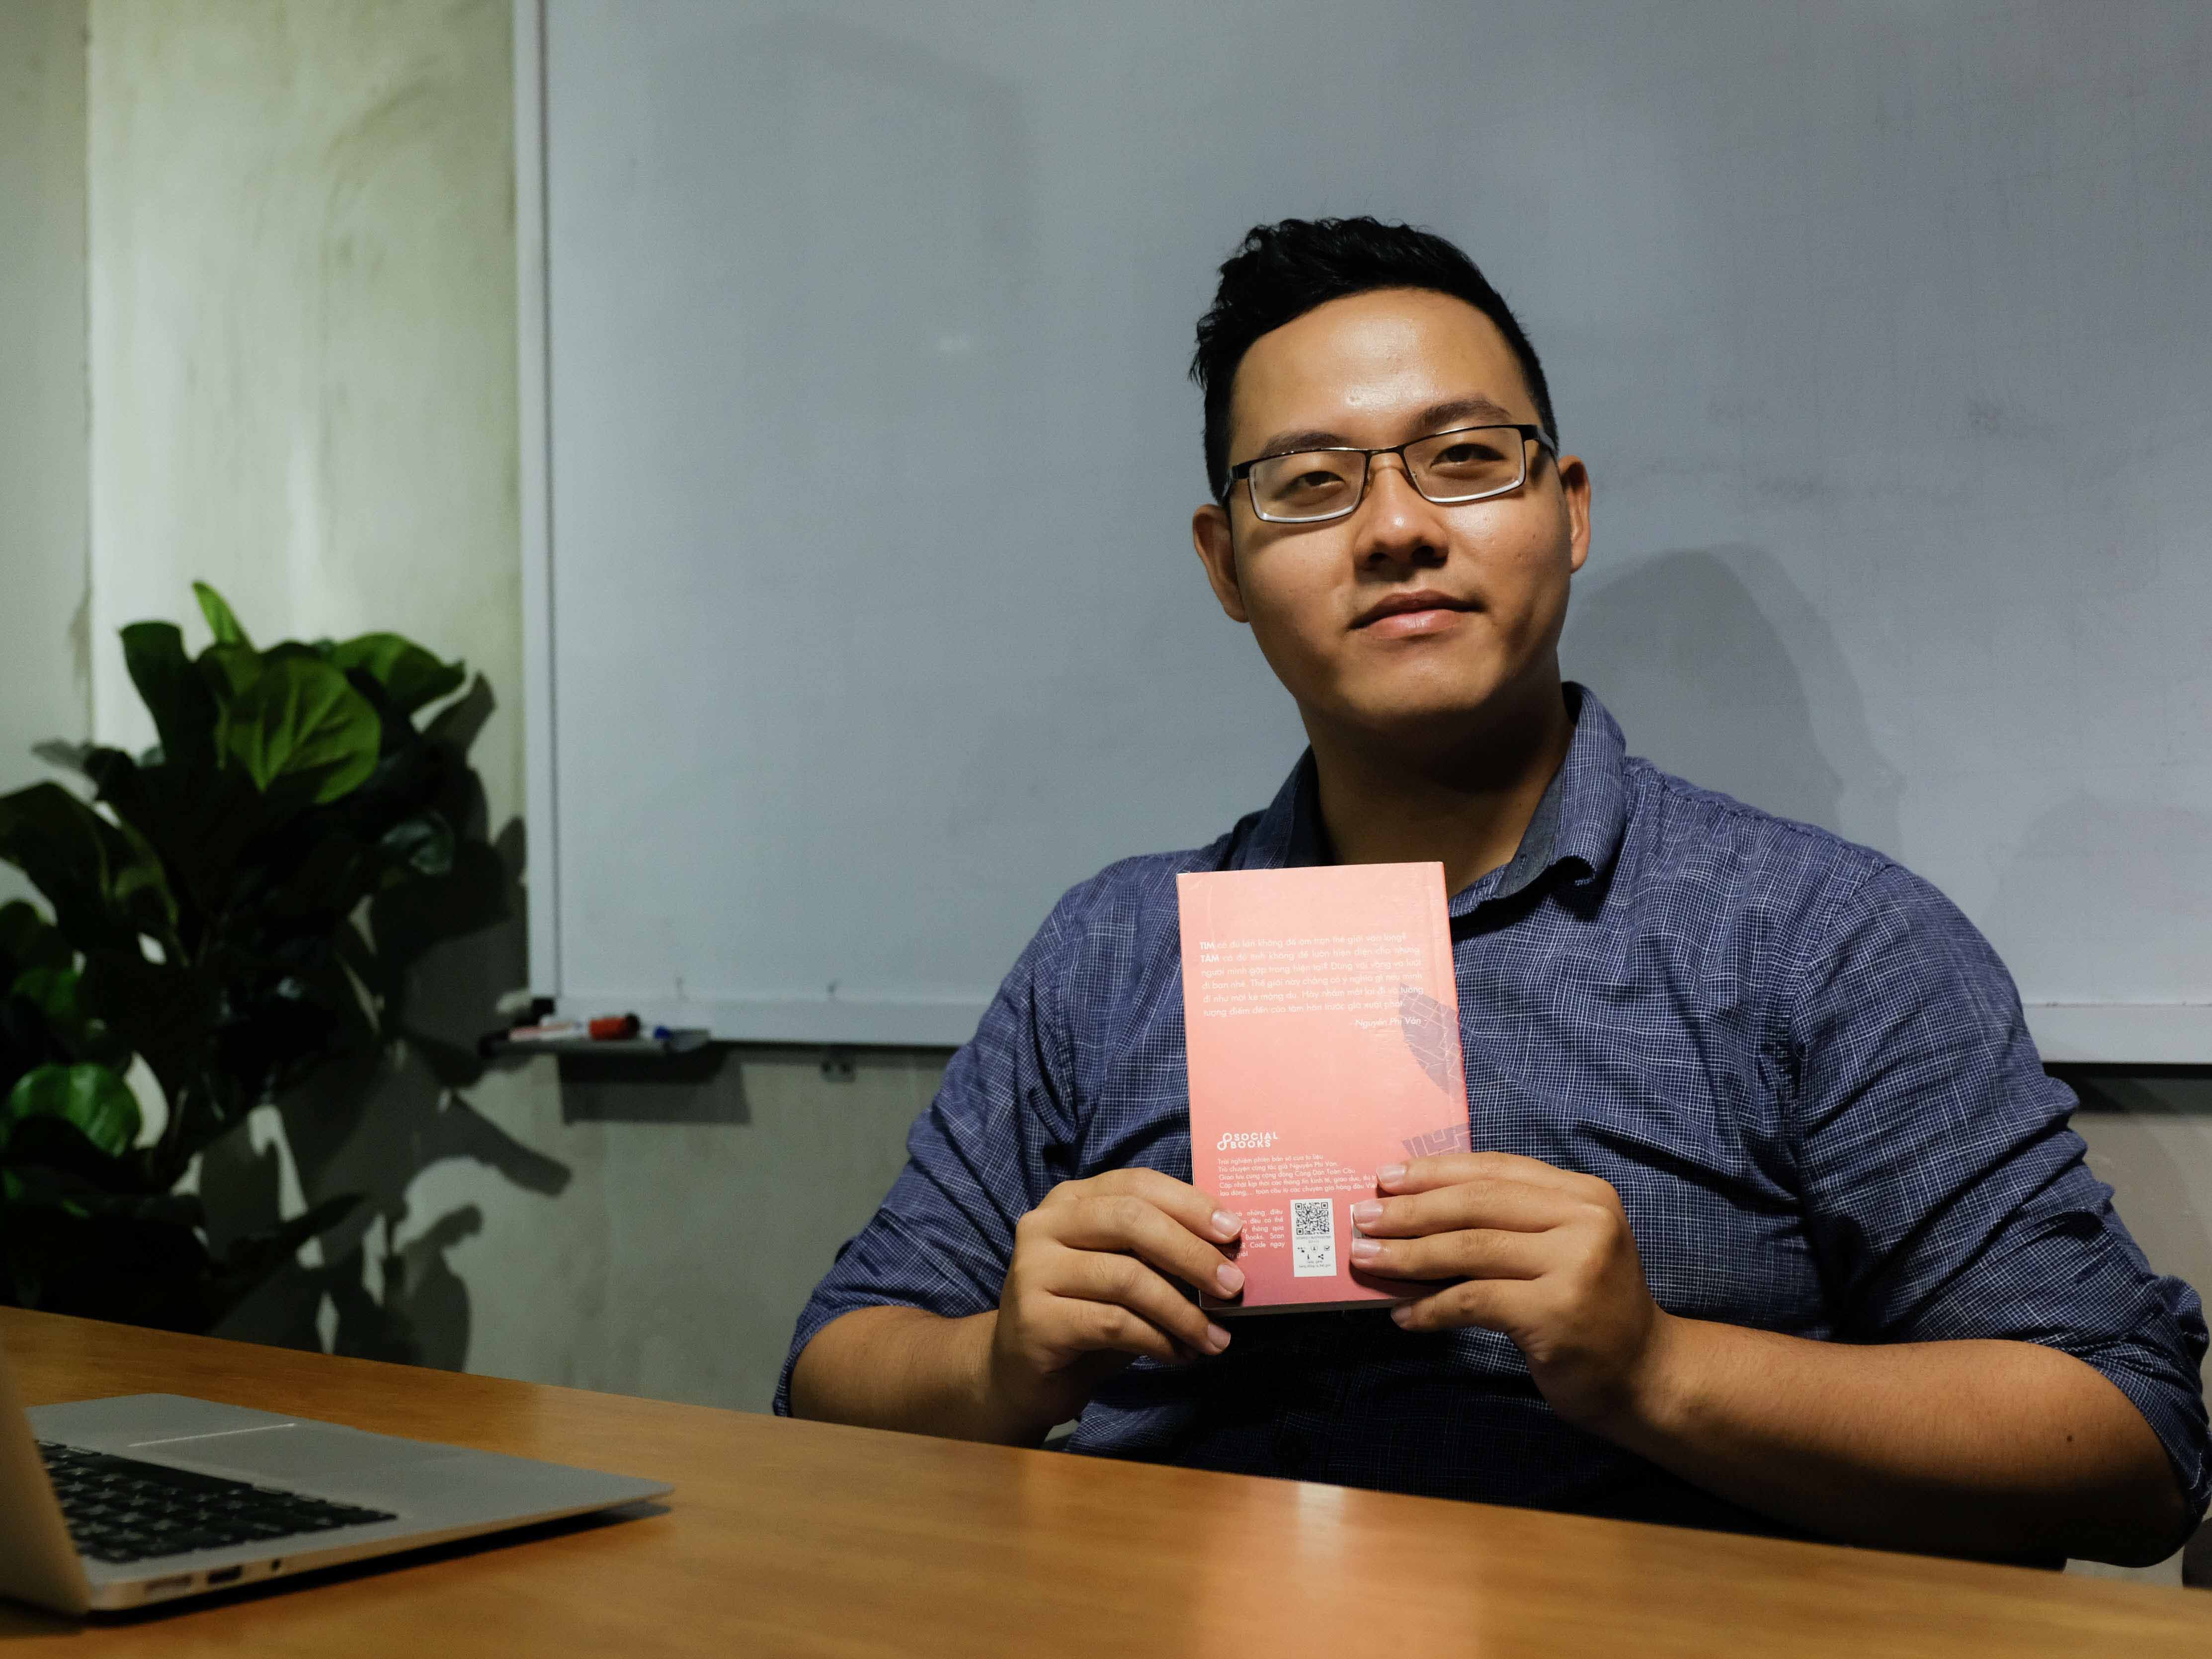 Bachelor of Commerce alumnus Nguyen Thanh Tu has developed a cloud-based product which can help brands talk, listen, understand and care for their retail consumers.